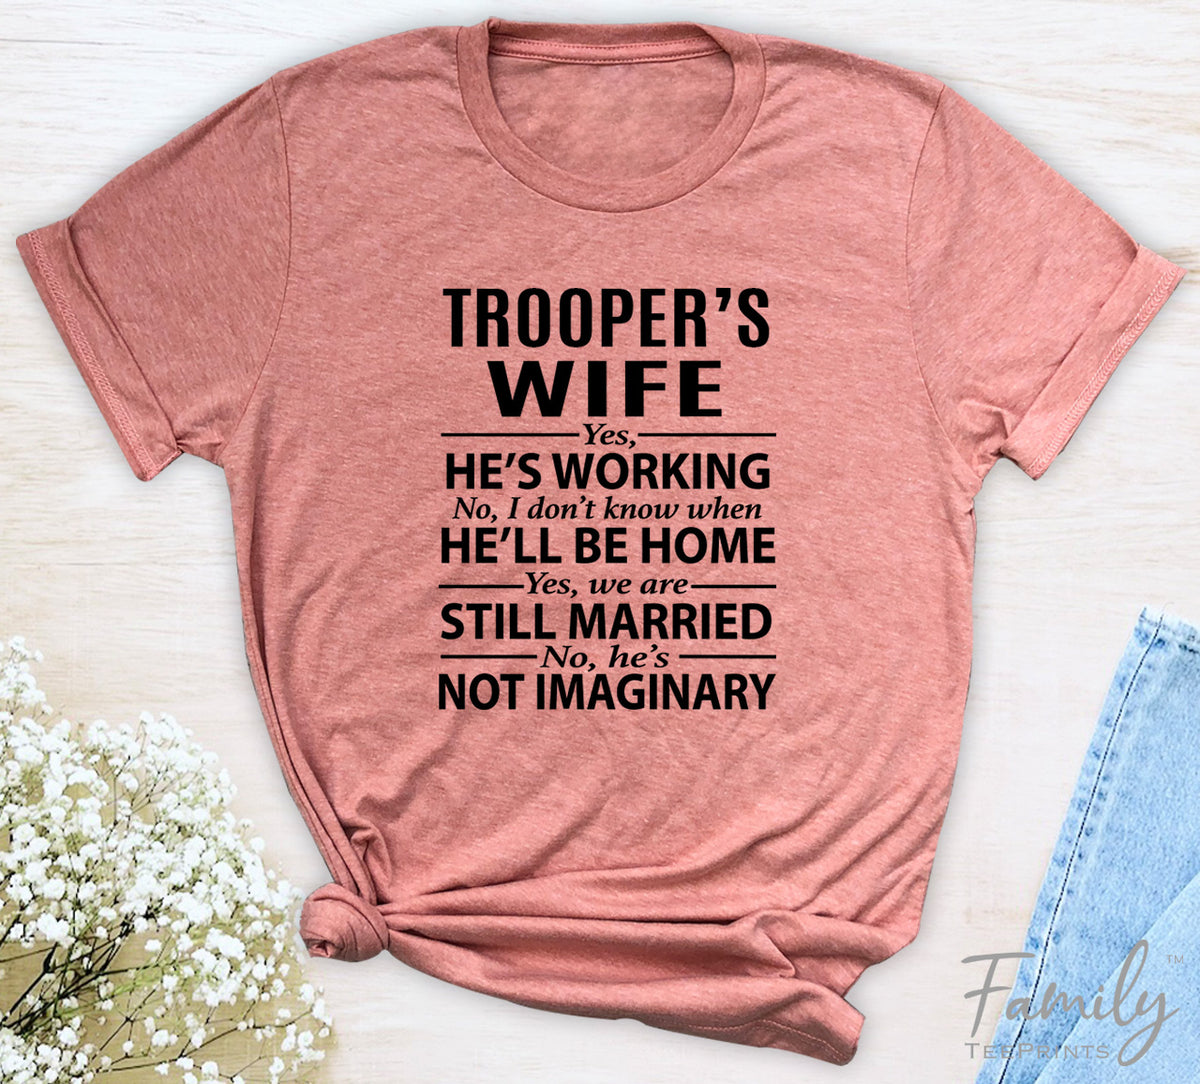 Trooper's Wife Yes, He's Working - Unisex T-shirt - Trooper's Wife Shirt - Gift For Trooper's Wife - familyteeprints